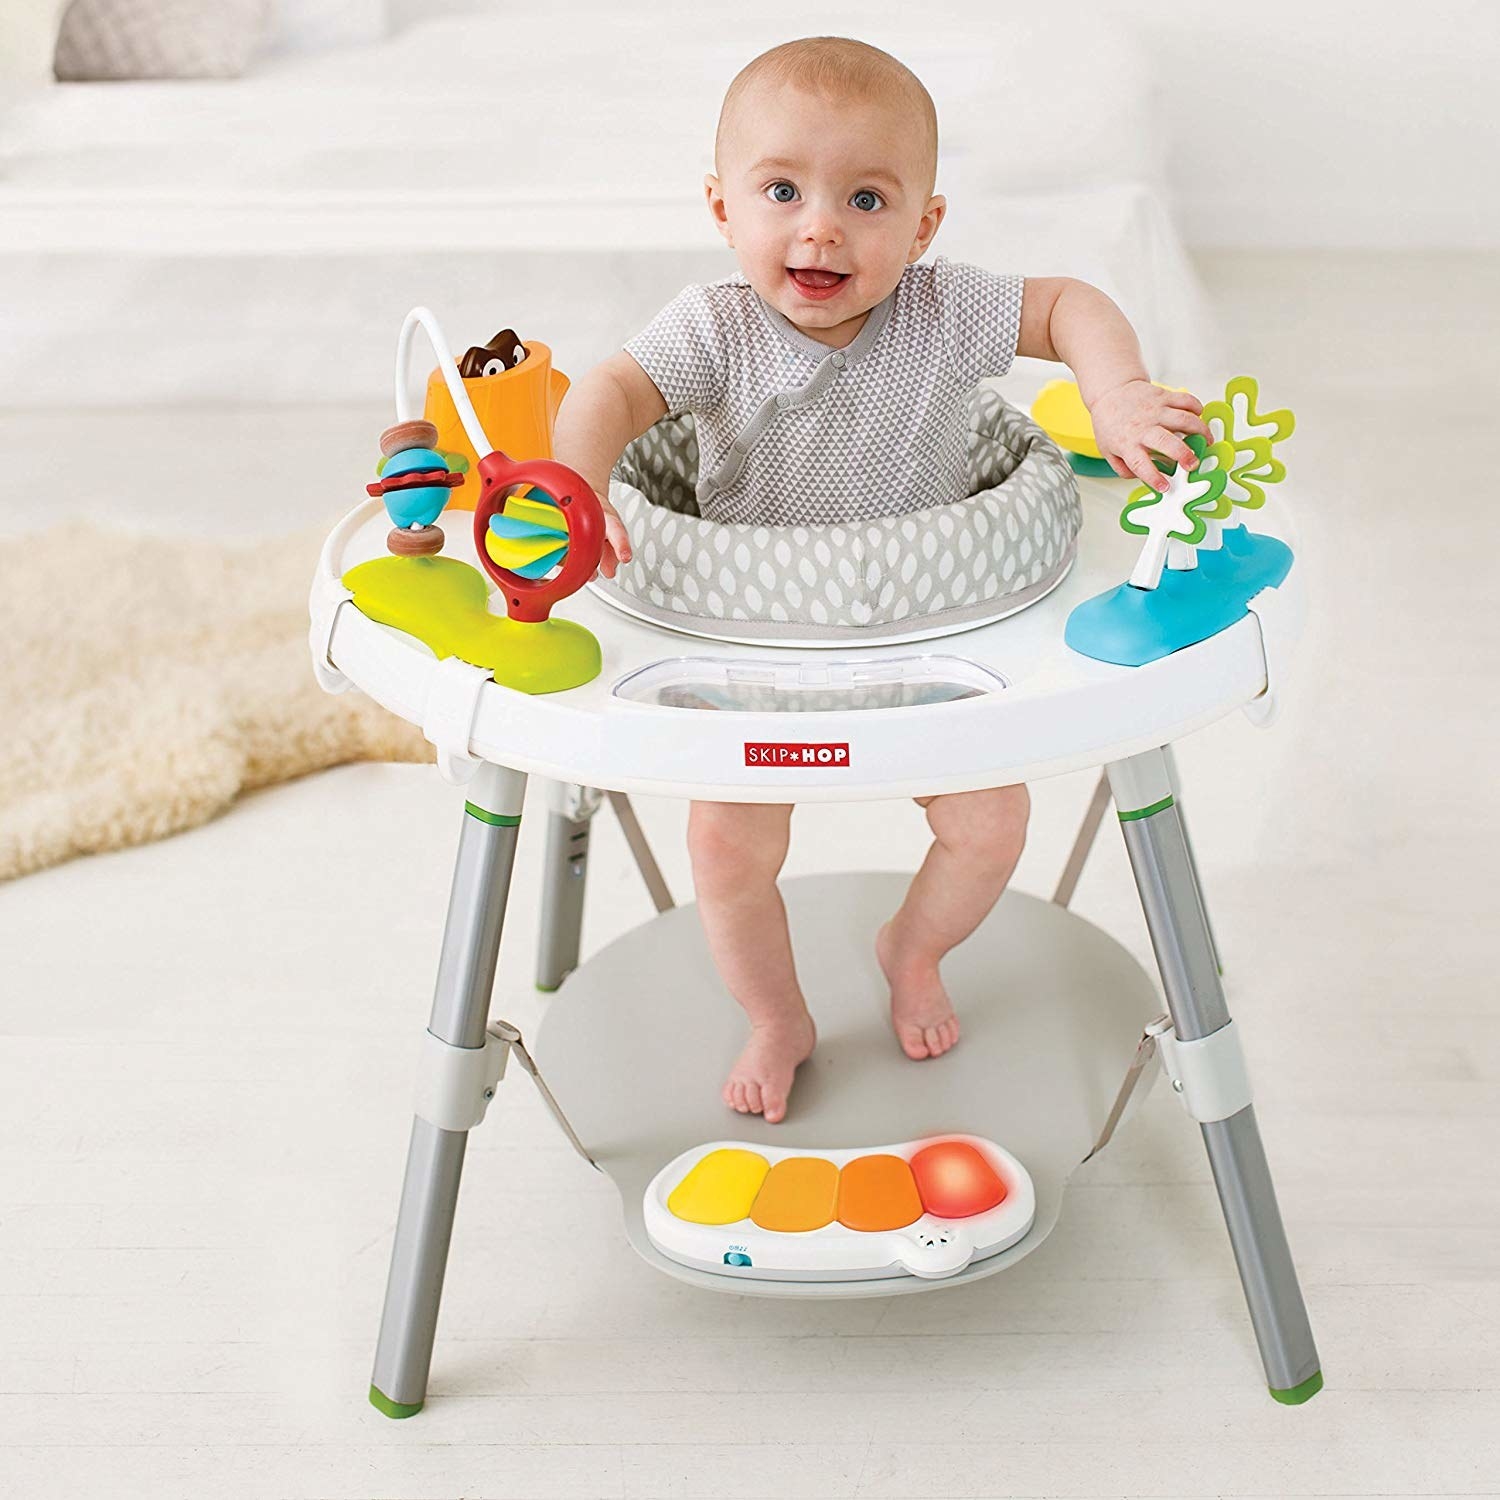 21 Of The Best Toys & Gifts For 3-Month-Olds